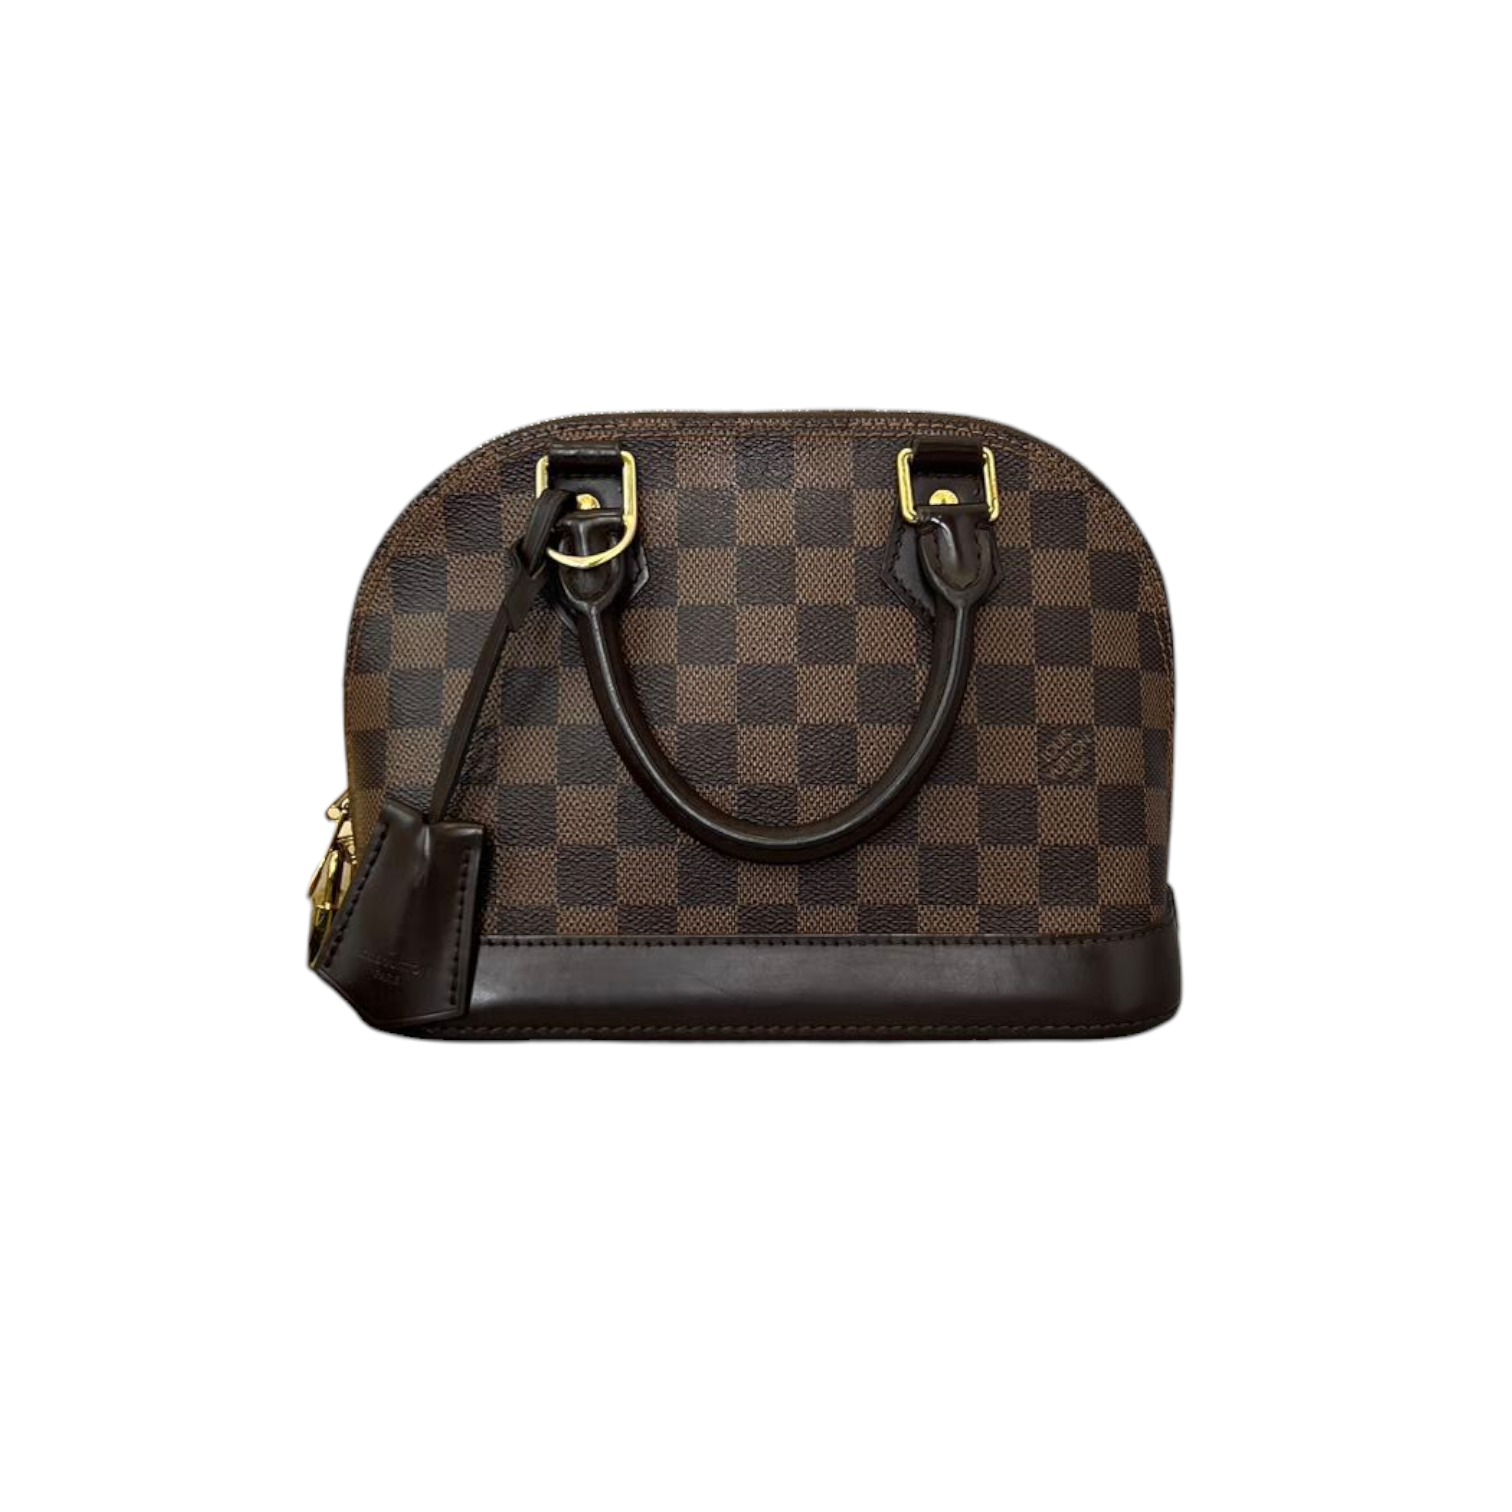 Speedy 25 with twilly and charm  Scarf on bag, Louis vuitton handbags,  Louis vuitton